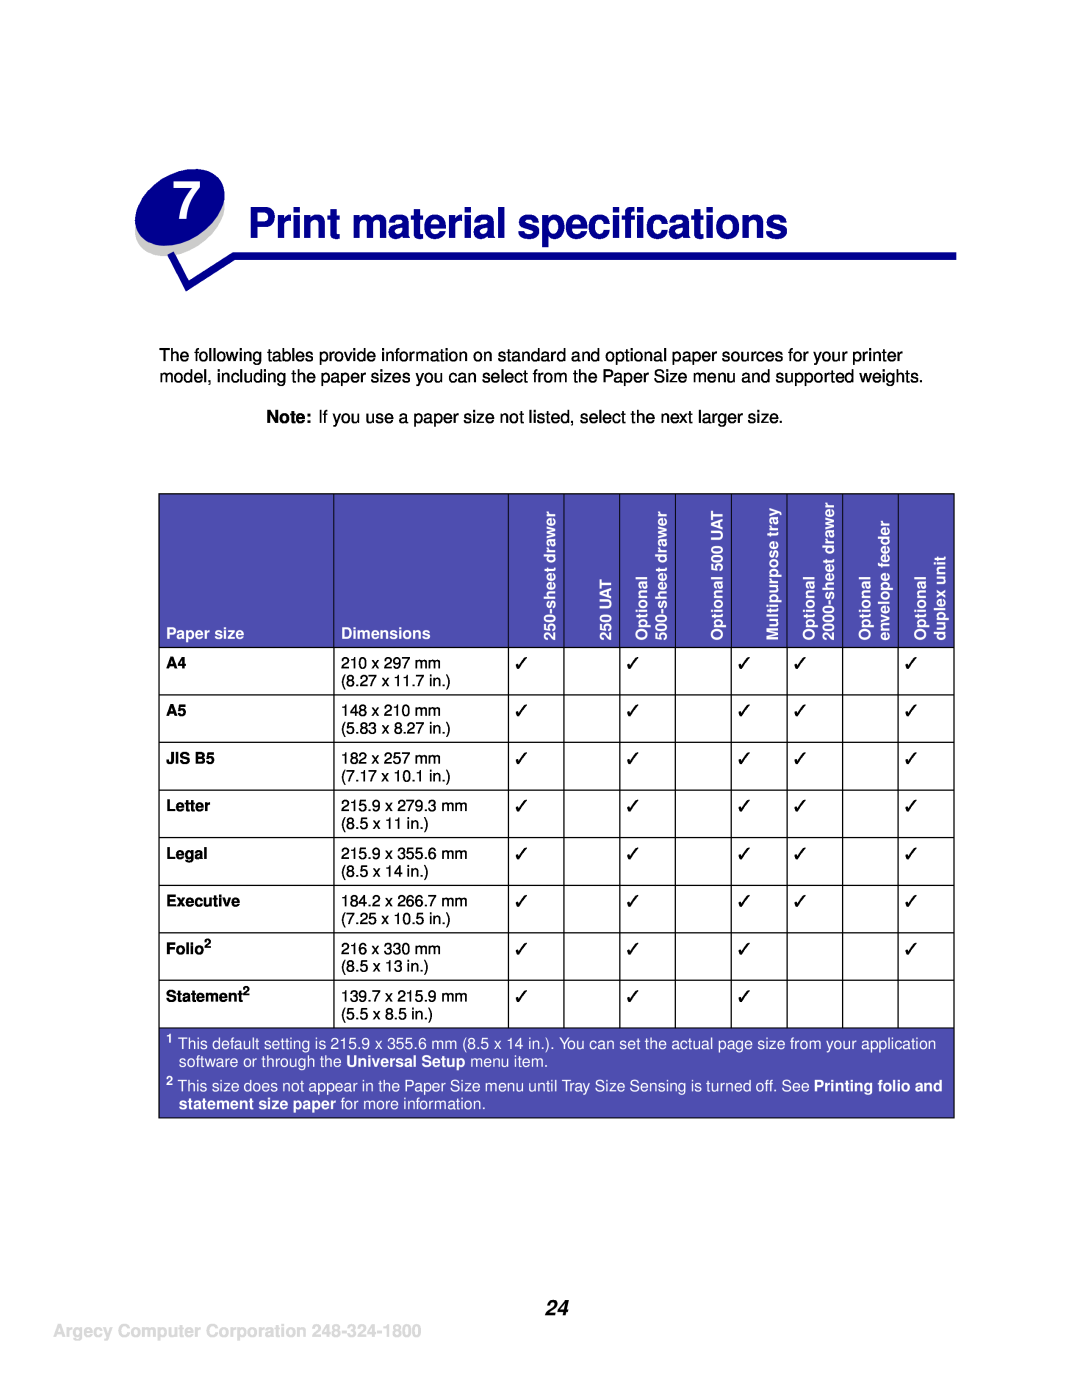 IBM 1125, 1120 manual Print material specifications, Note If you use a paper size not listed, select the next larger size 